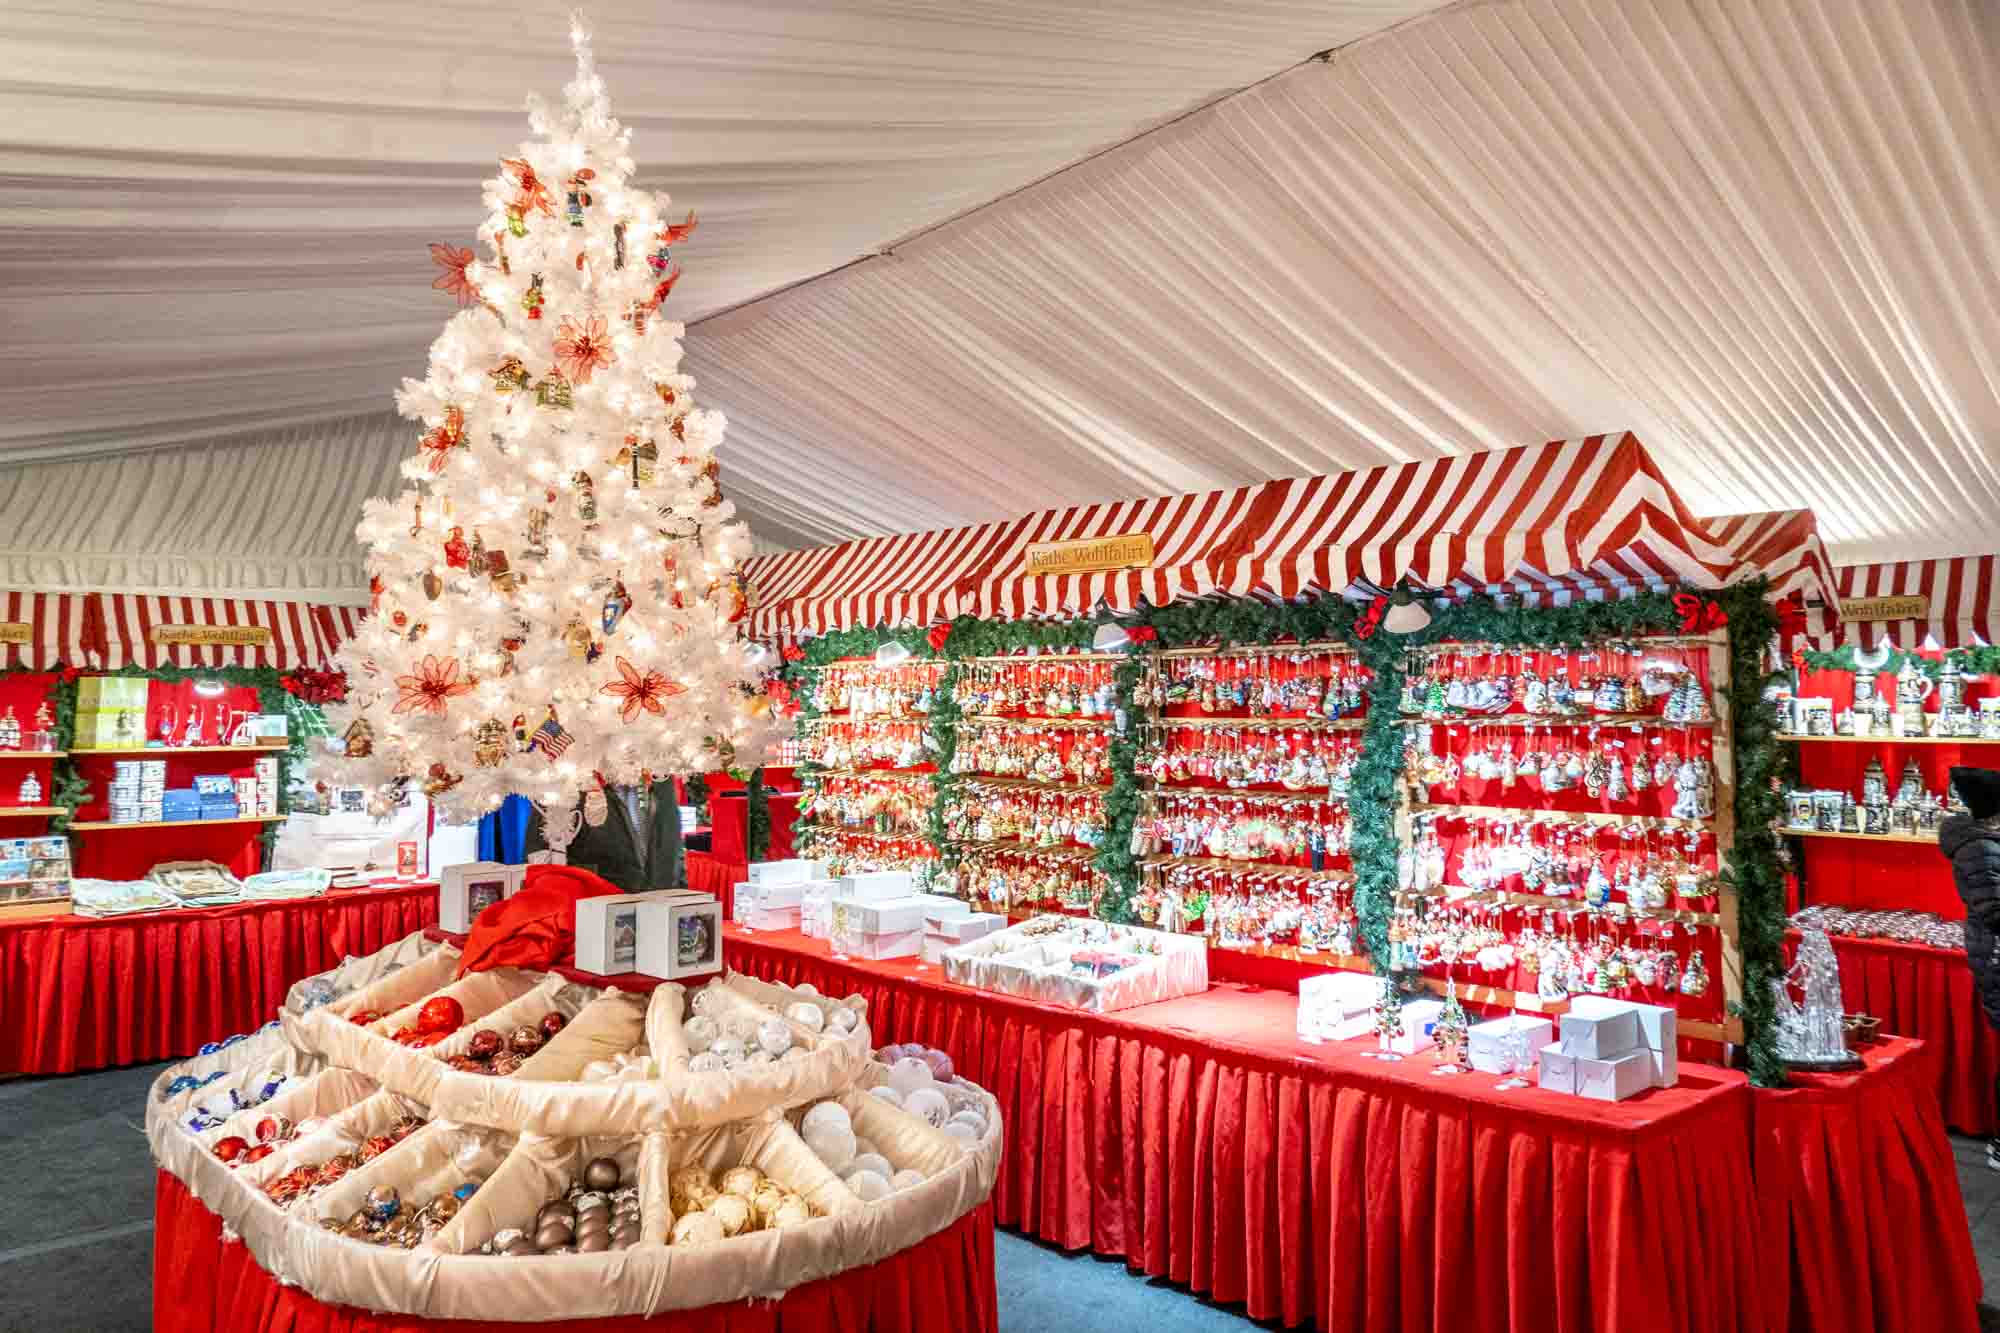 Rows of hanging ornaments for sale and a white Christmas tree under a tent